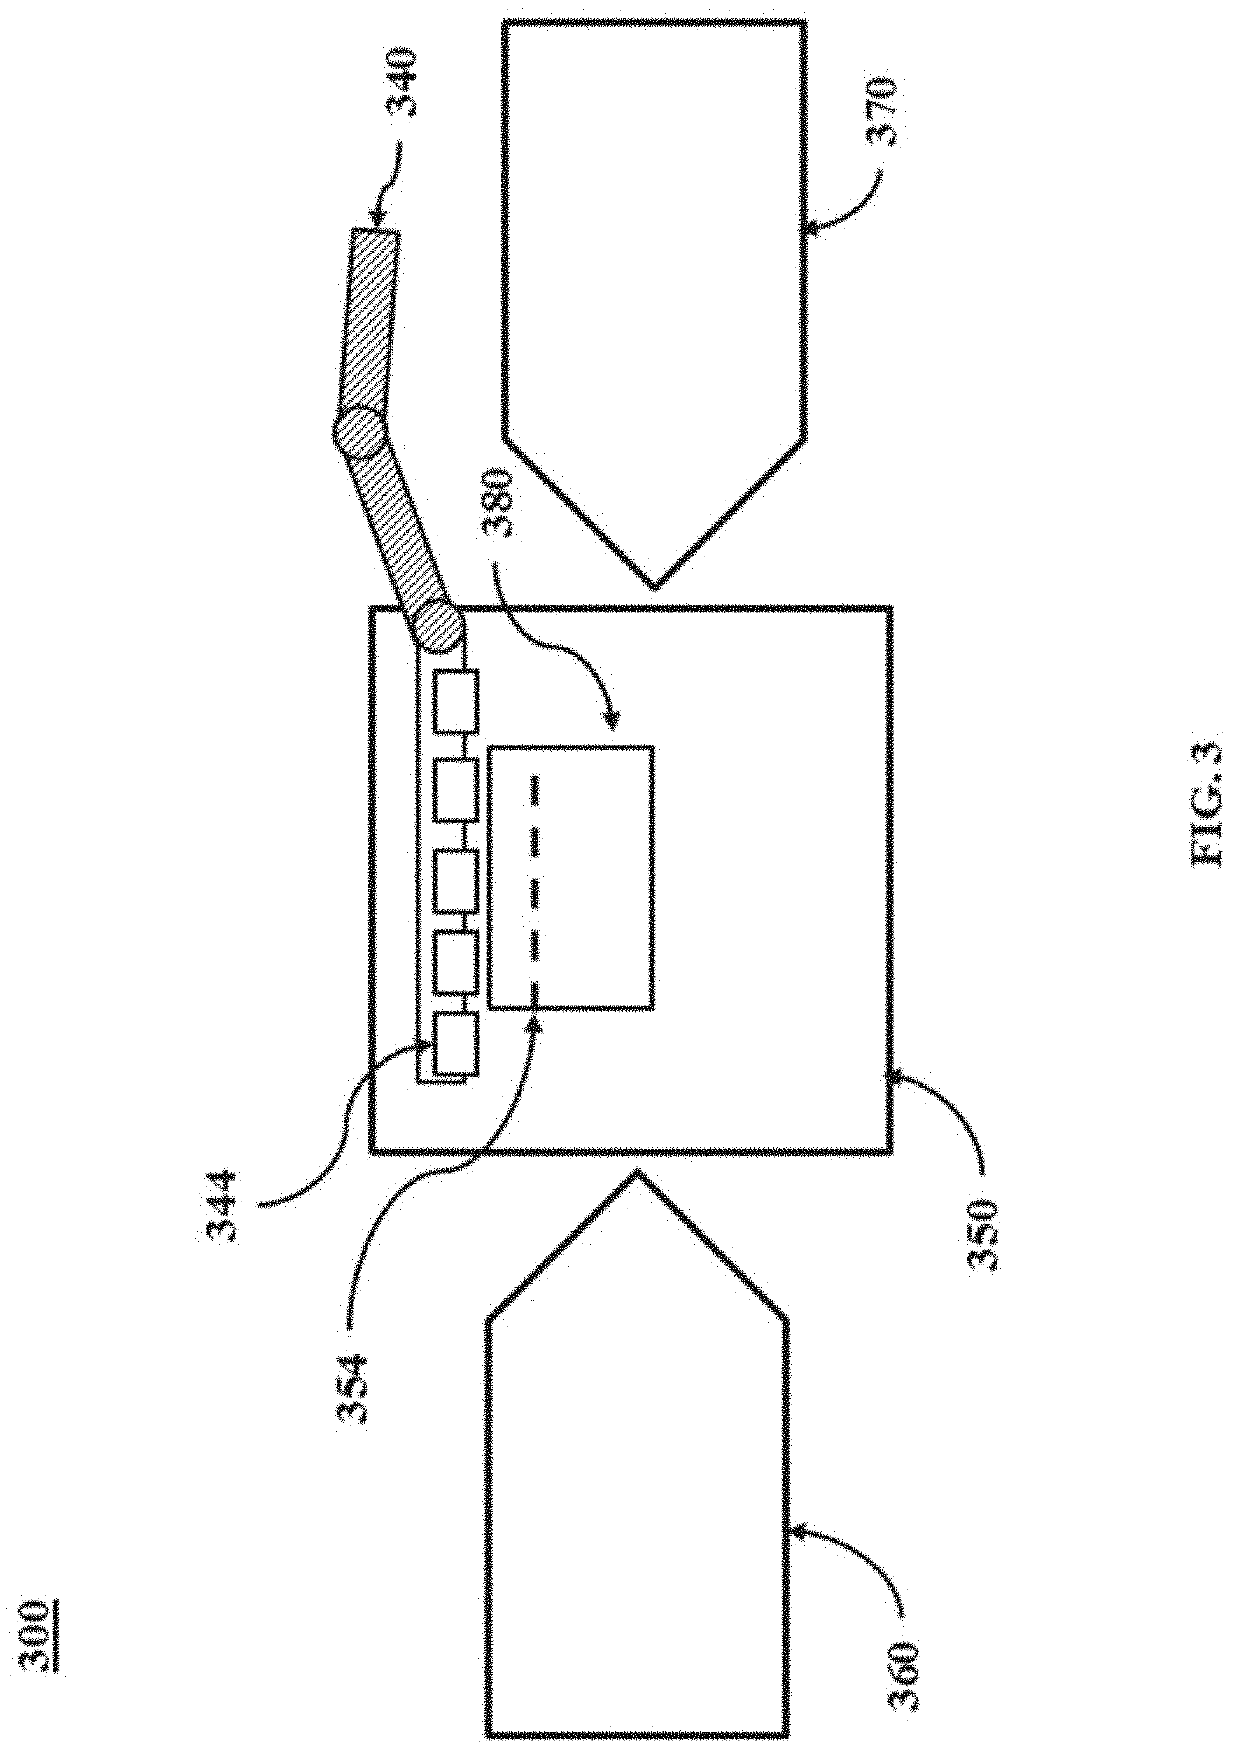 Systems and methods for identifying and transferring sheets